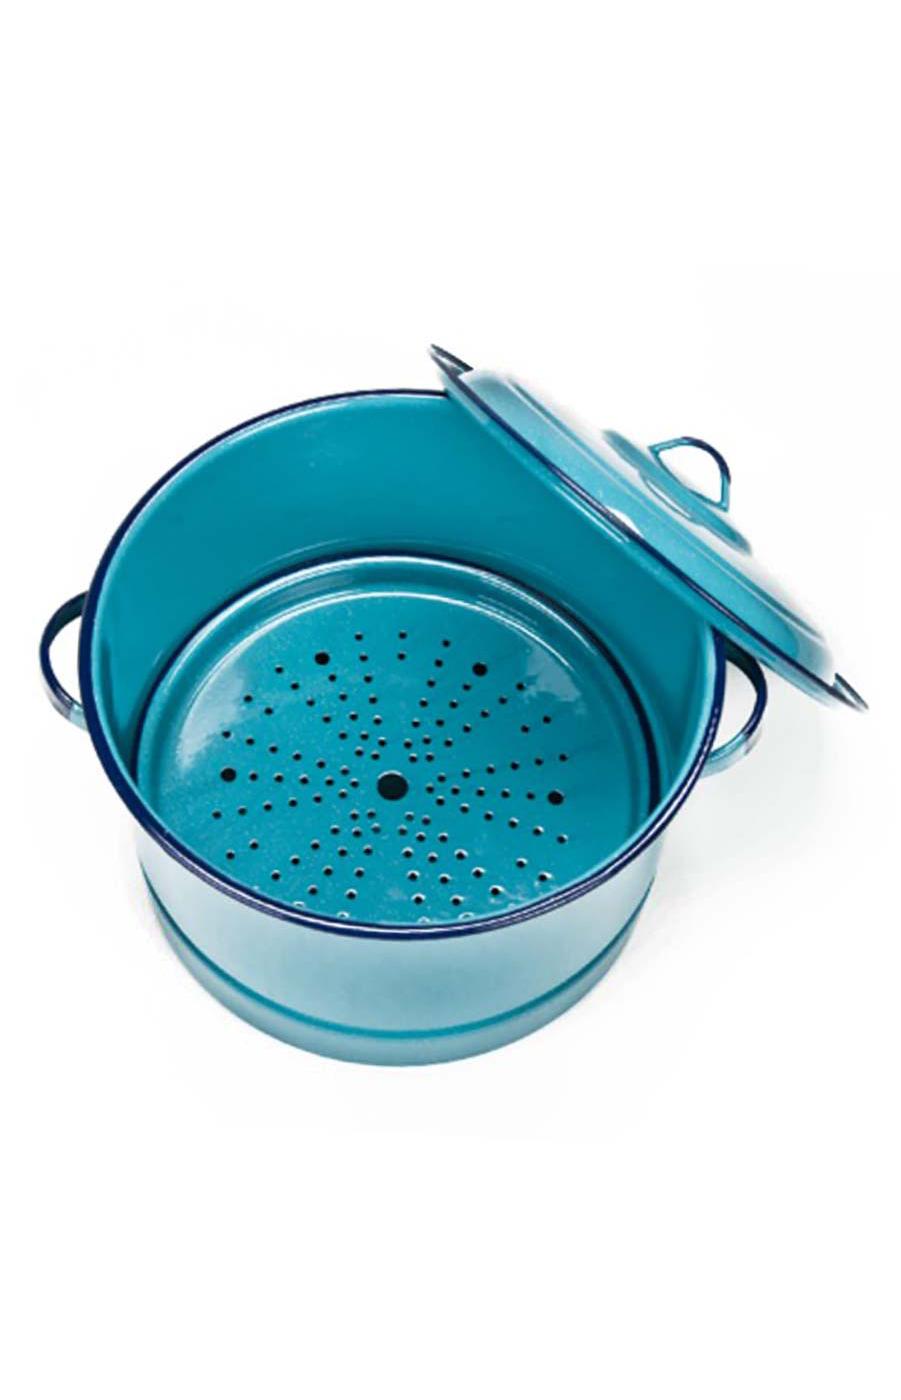 Cinsa Turquoise Steamer Pot with Lid & Trivet; image 2 of 3